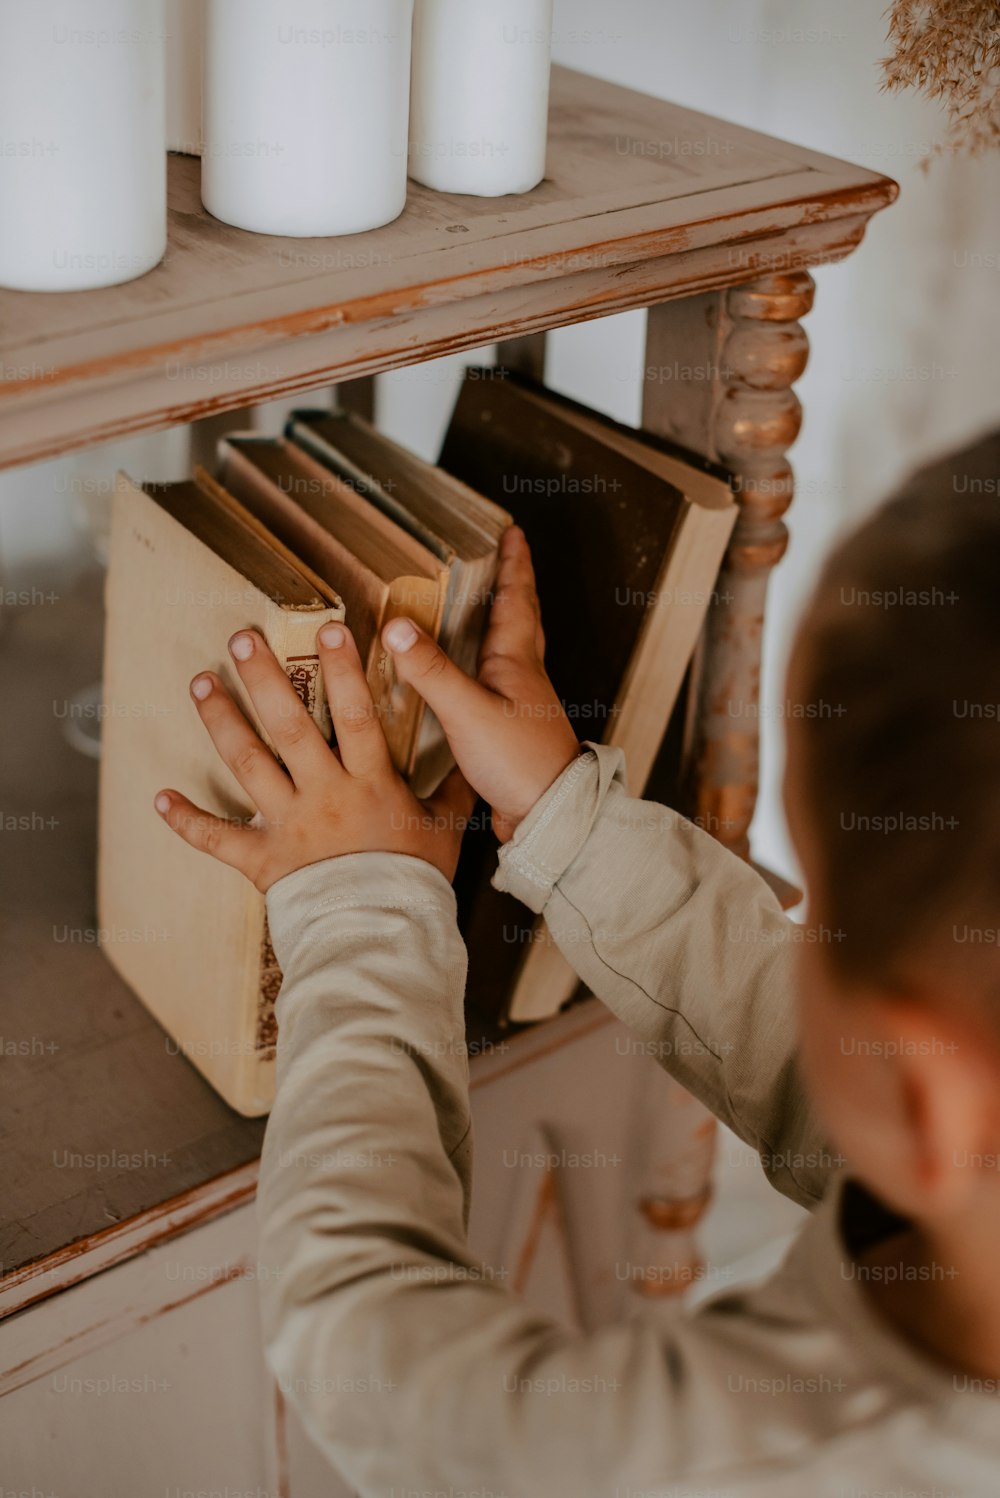 a young child reaching for a book on a shelf